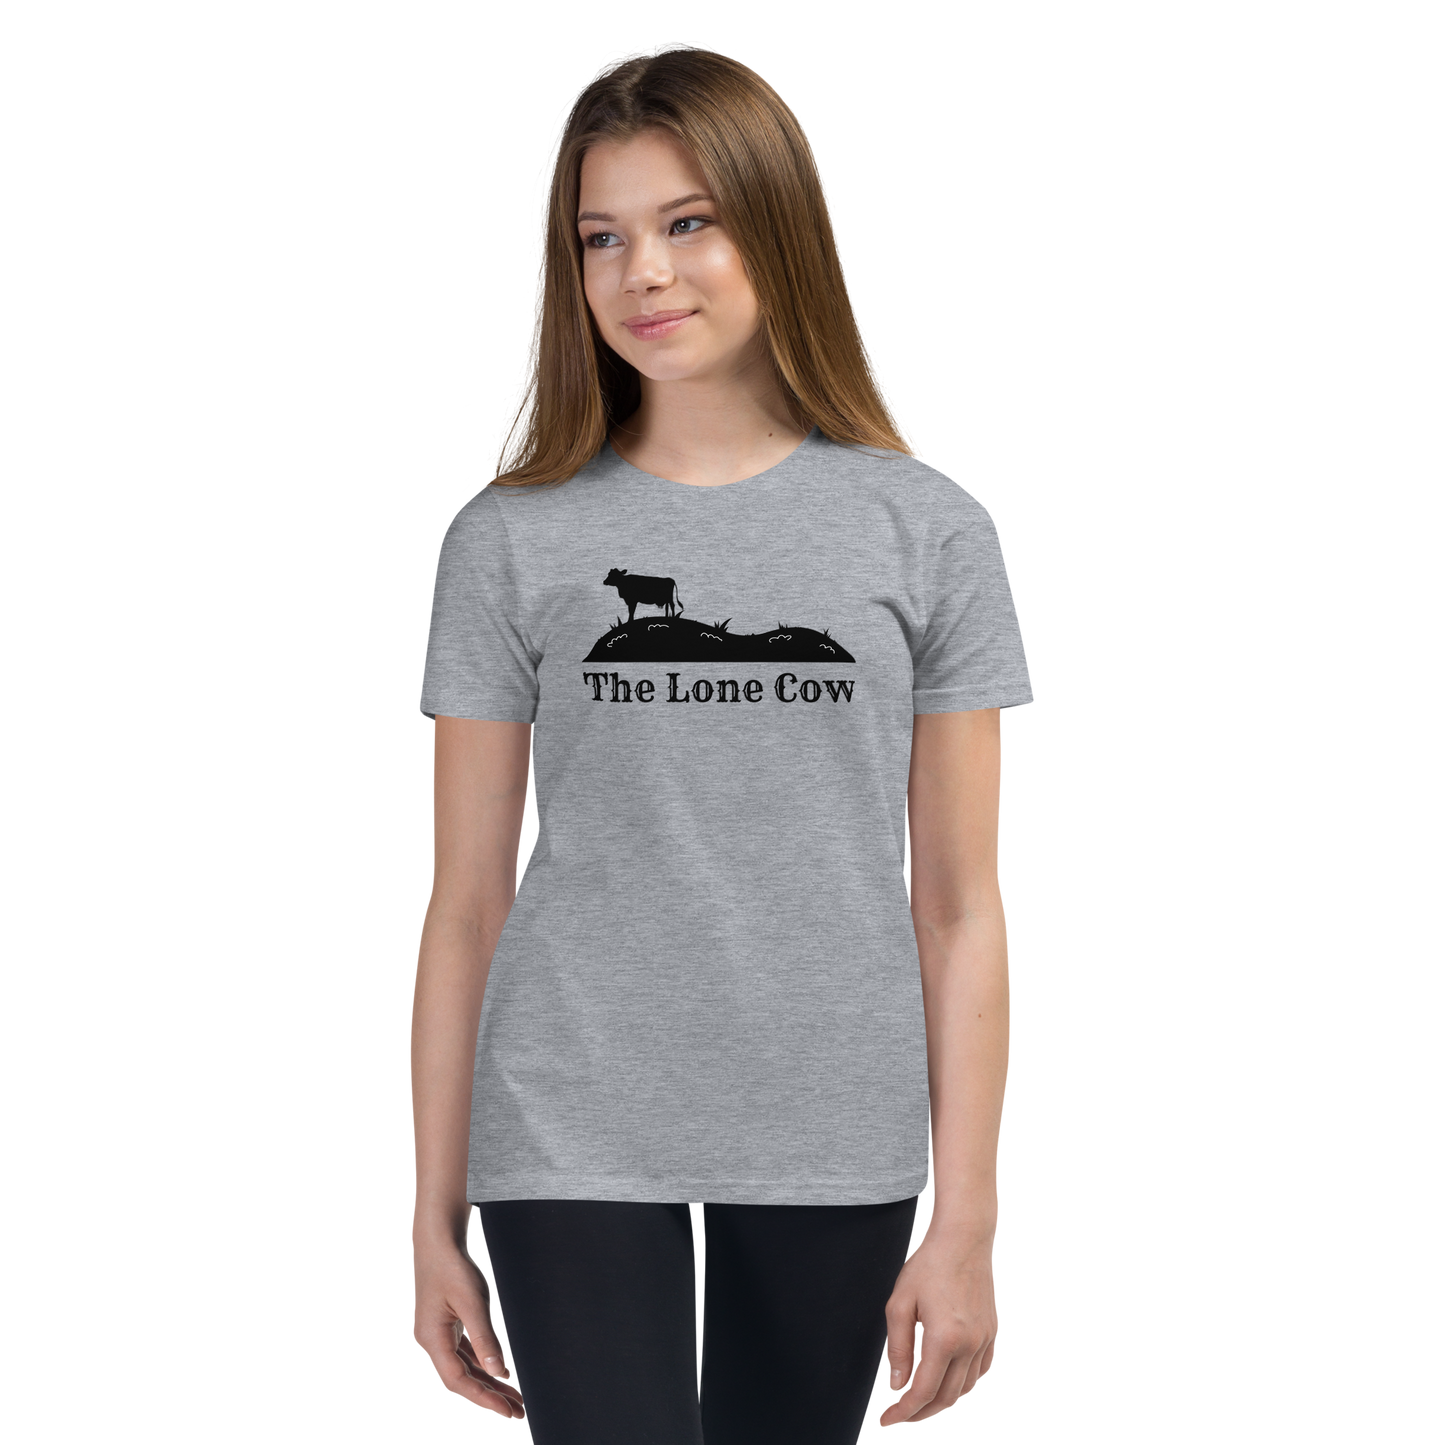 The Lone Cow Youth Short Sleeve T-Shirt